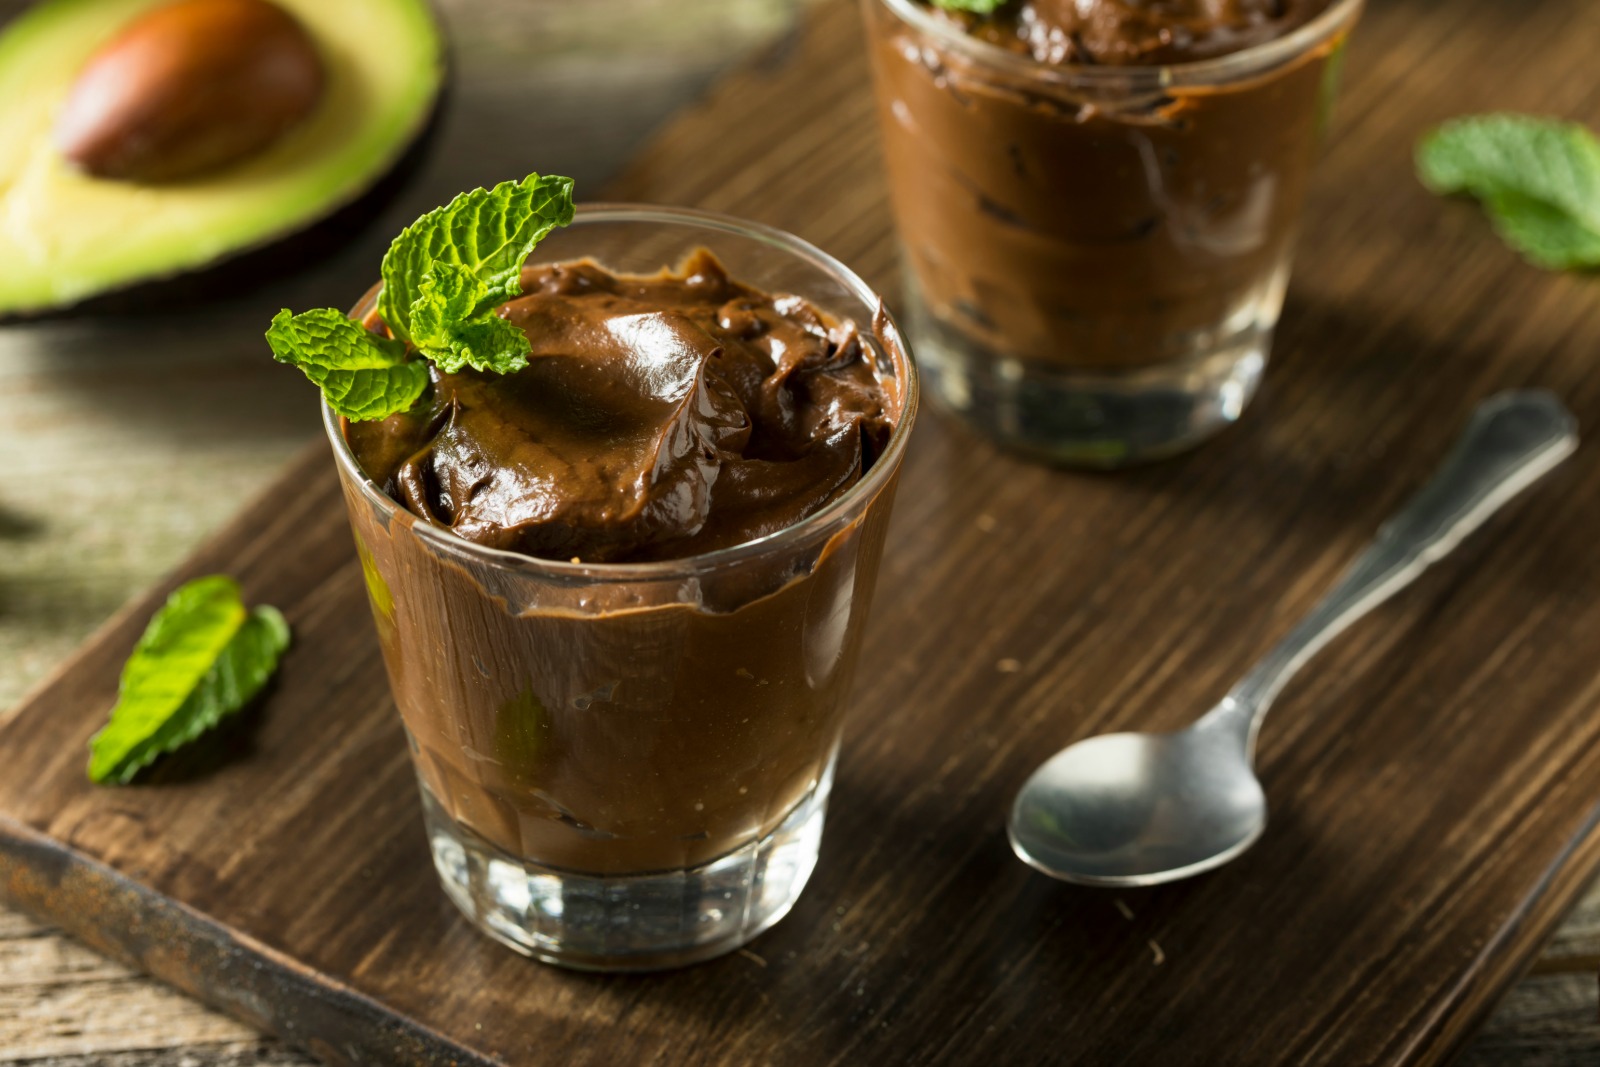 This healthy vegan chocolate avocado pudding is dairy-free, gluten-free, refined- sugar free, super easy to prepare and ready in 5 minutes! (#vegan) ordinaryvegan.net